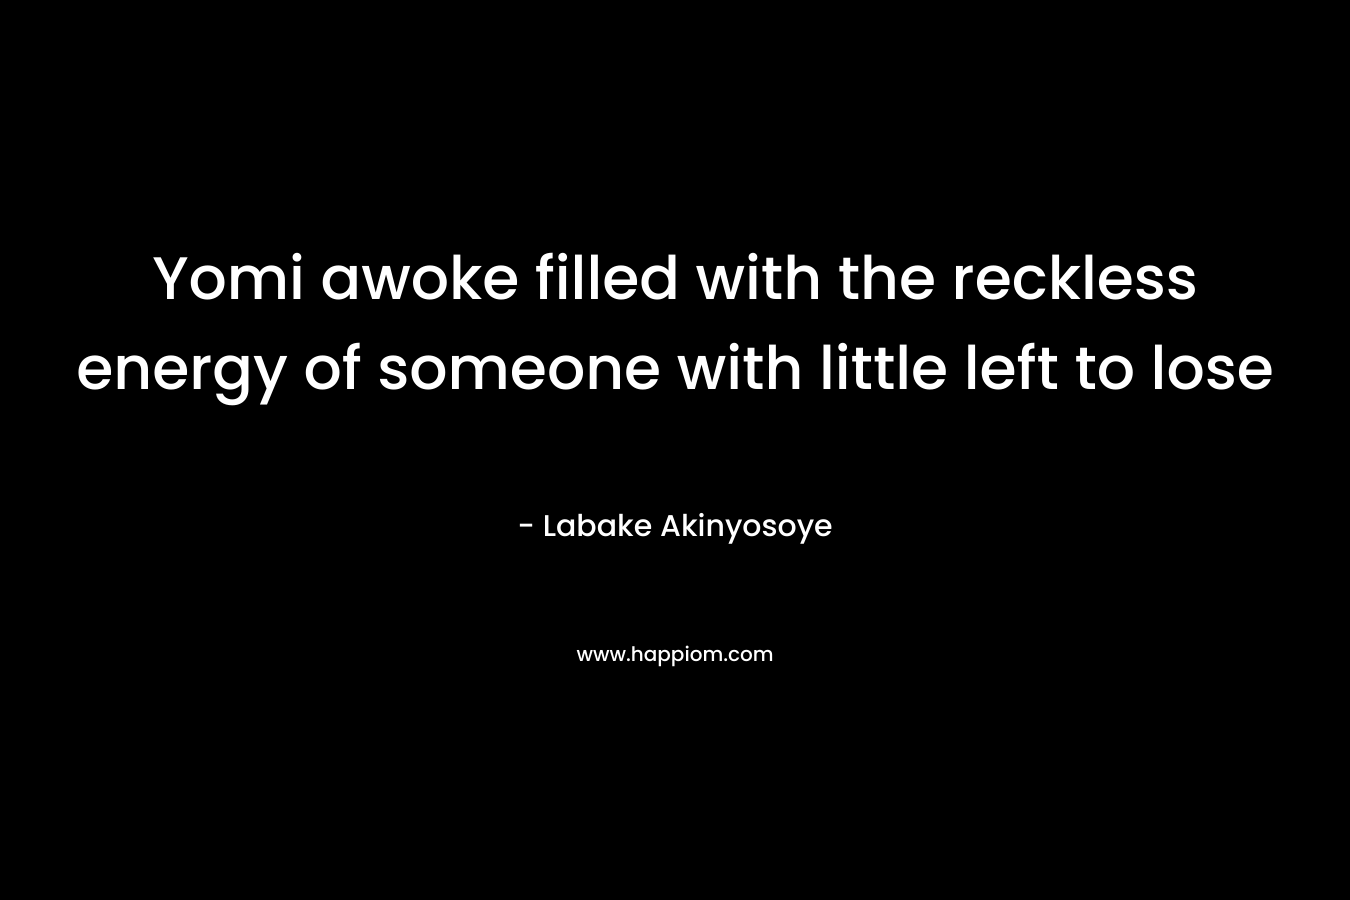 Yomi awoke filled with the reckless energy of someone with little left to lose